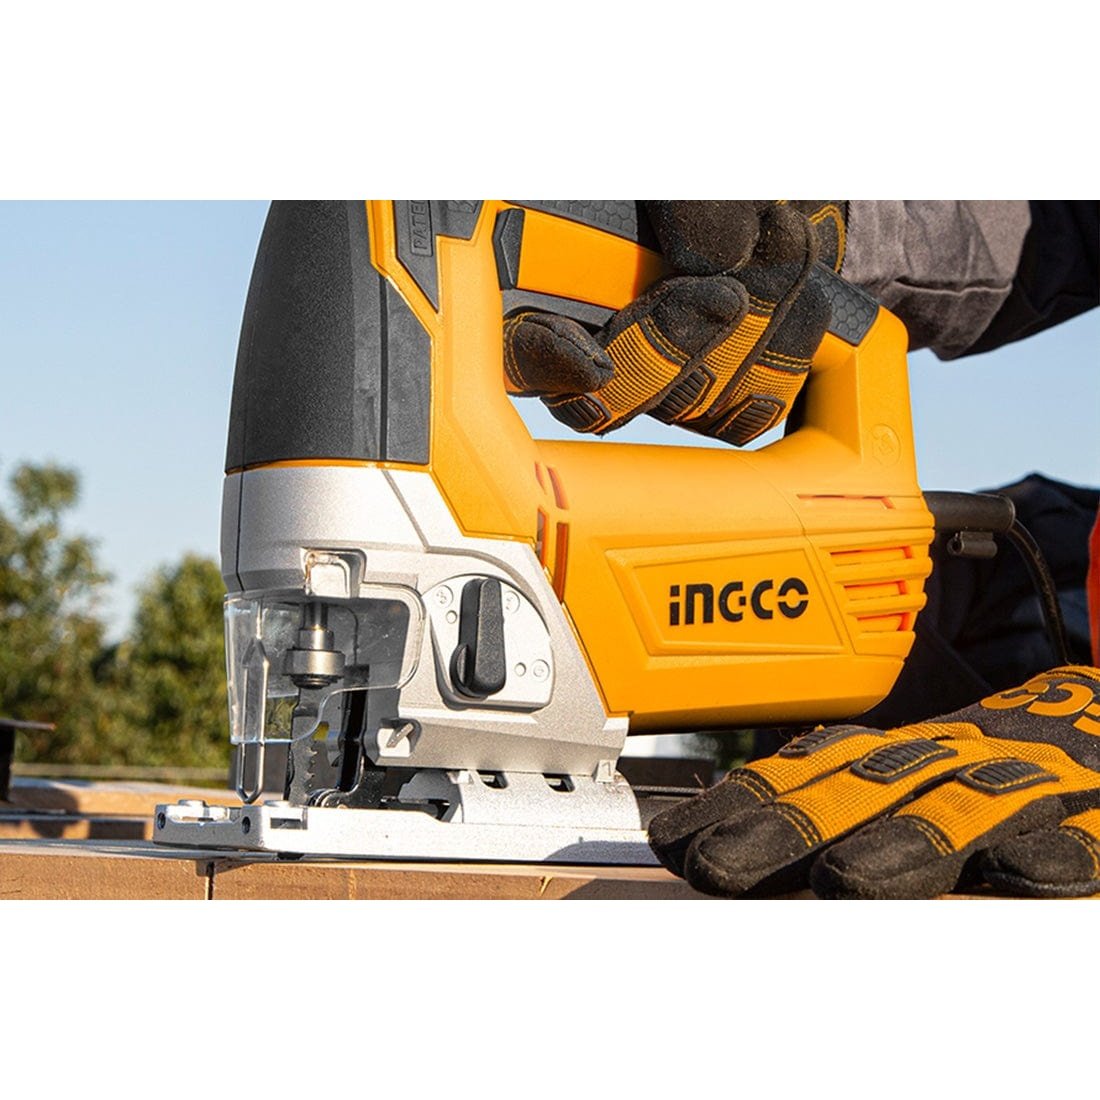 Ingco Jig Saw 800W - JS80068 | Supply Master | Accra, Ghana Jigsaw Buy Tools hardware Building materials